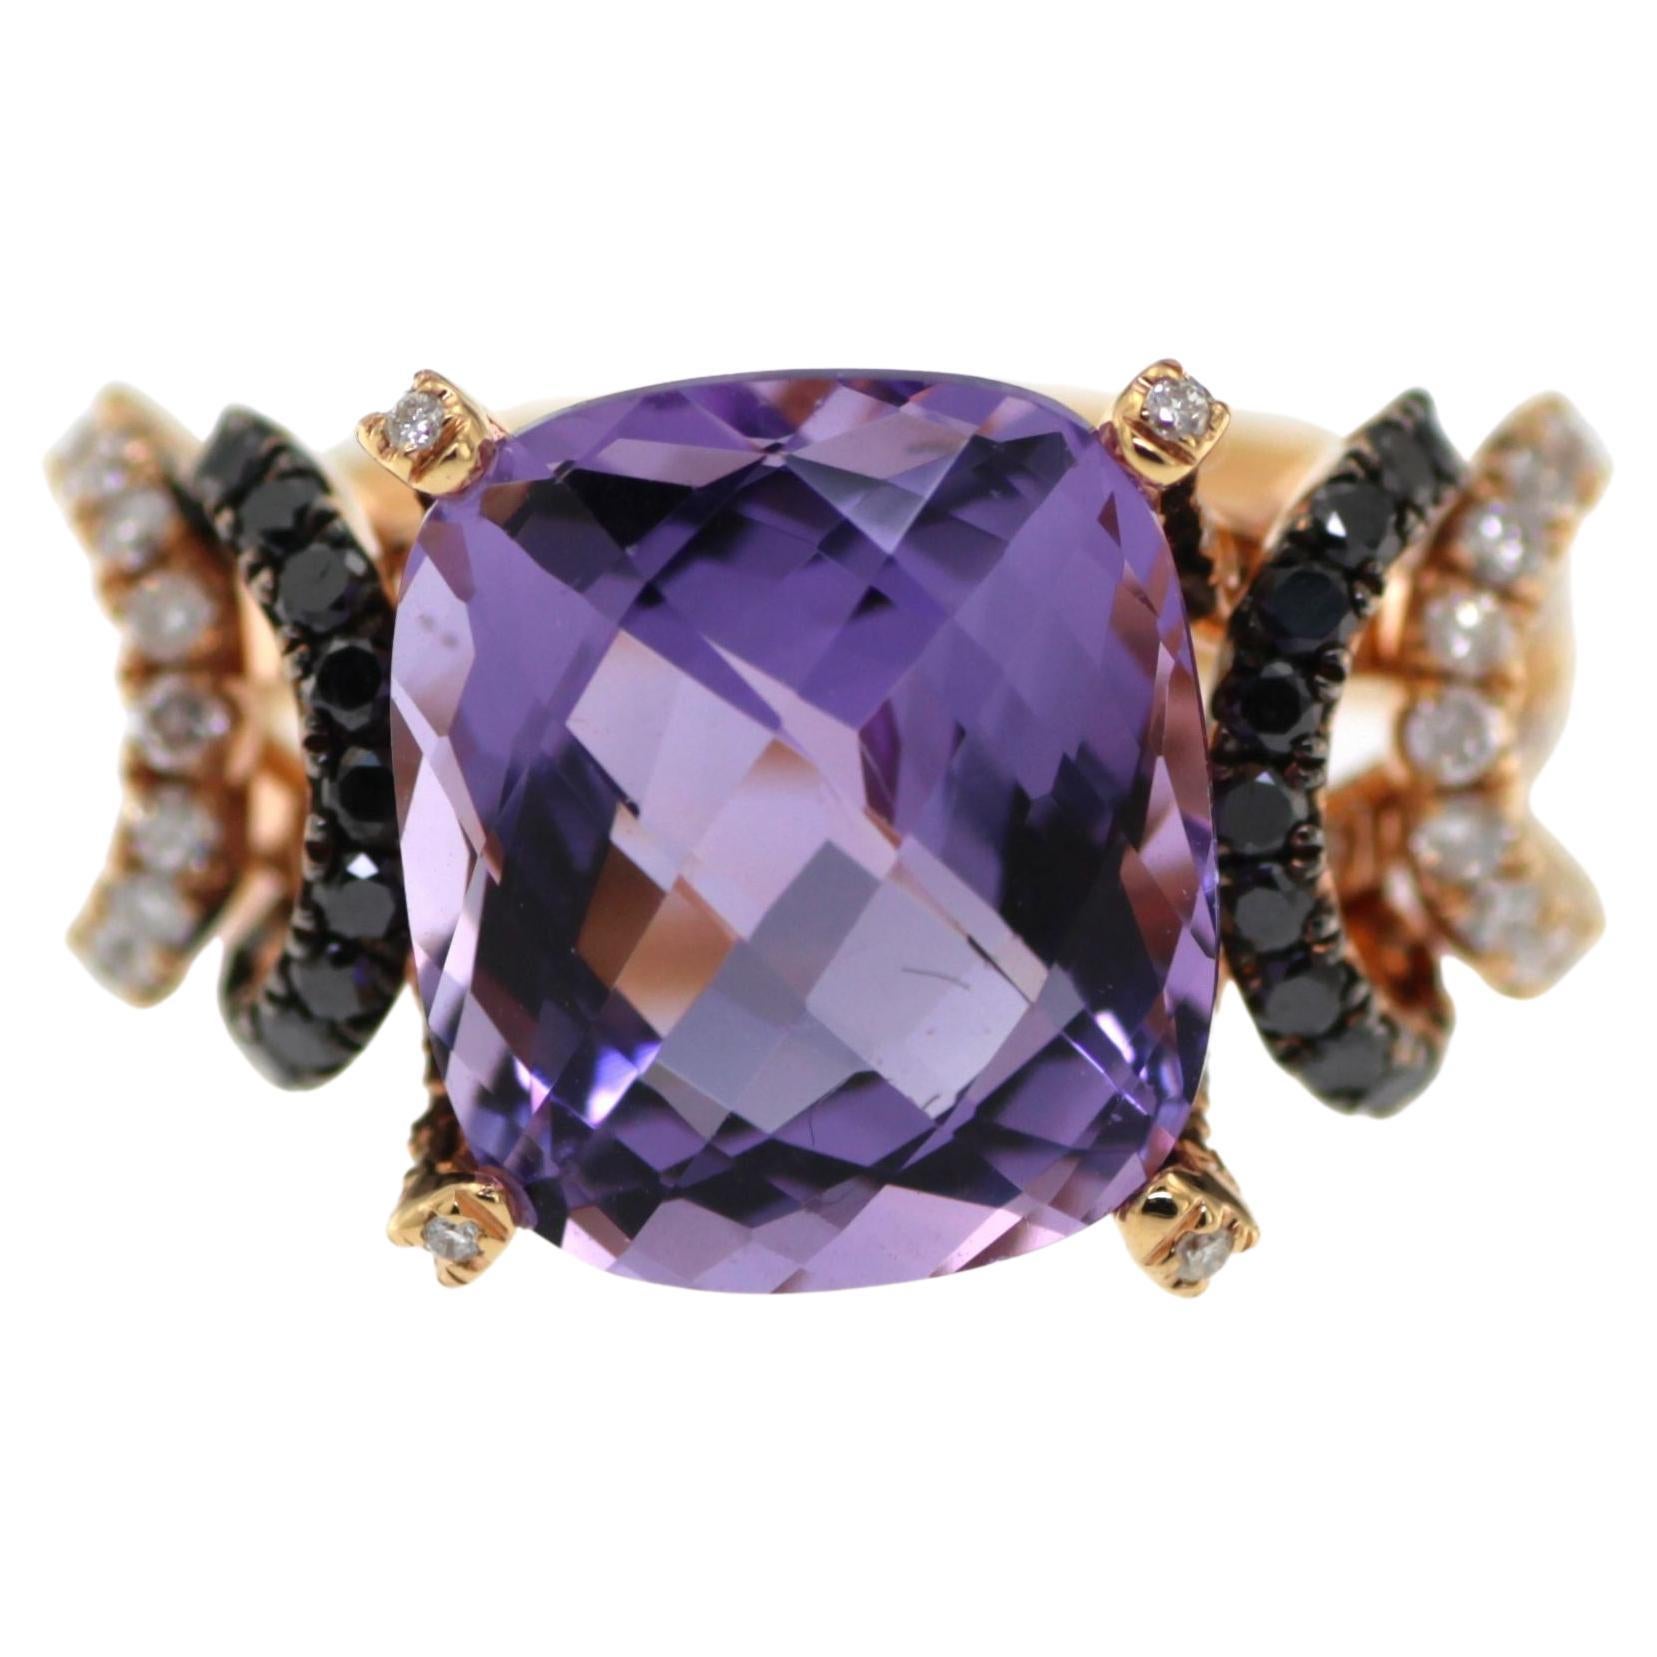 6.44Ct Cushion Cut Amethyst with Black and White Diamonds in 18K Rose Gold